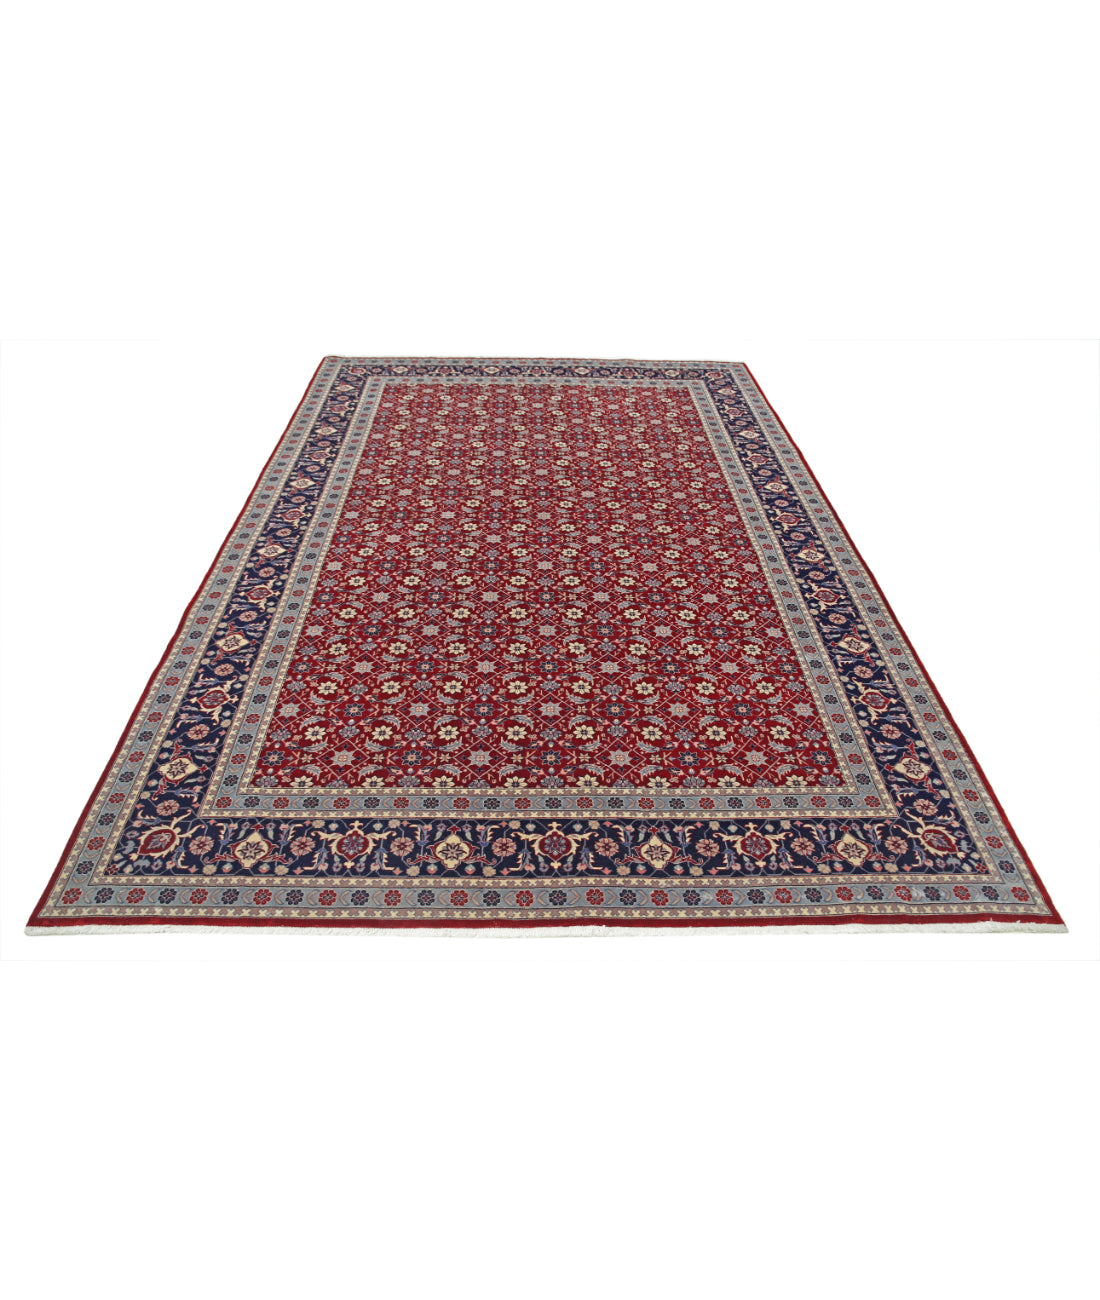 Hand Knotted Heritage Fine Persian Style Wool Rug - 6'7'' x 9'10'' 6' 7" X 9' 10" (201 X 300) / Red / Blue